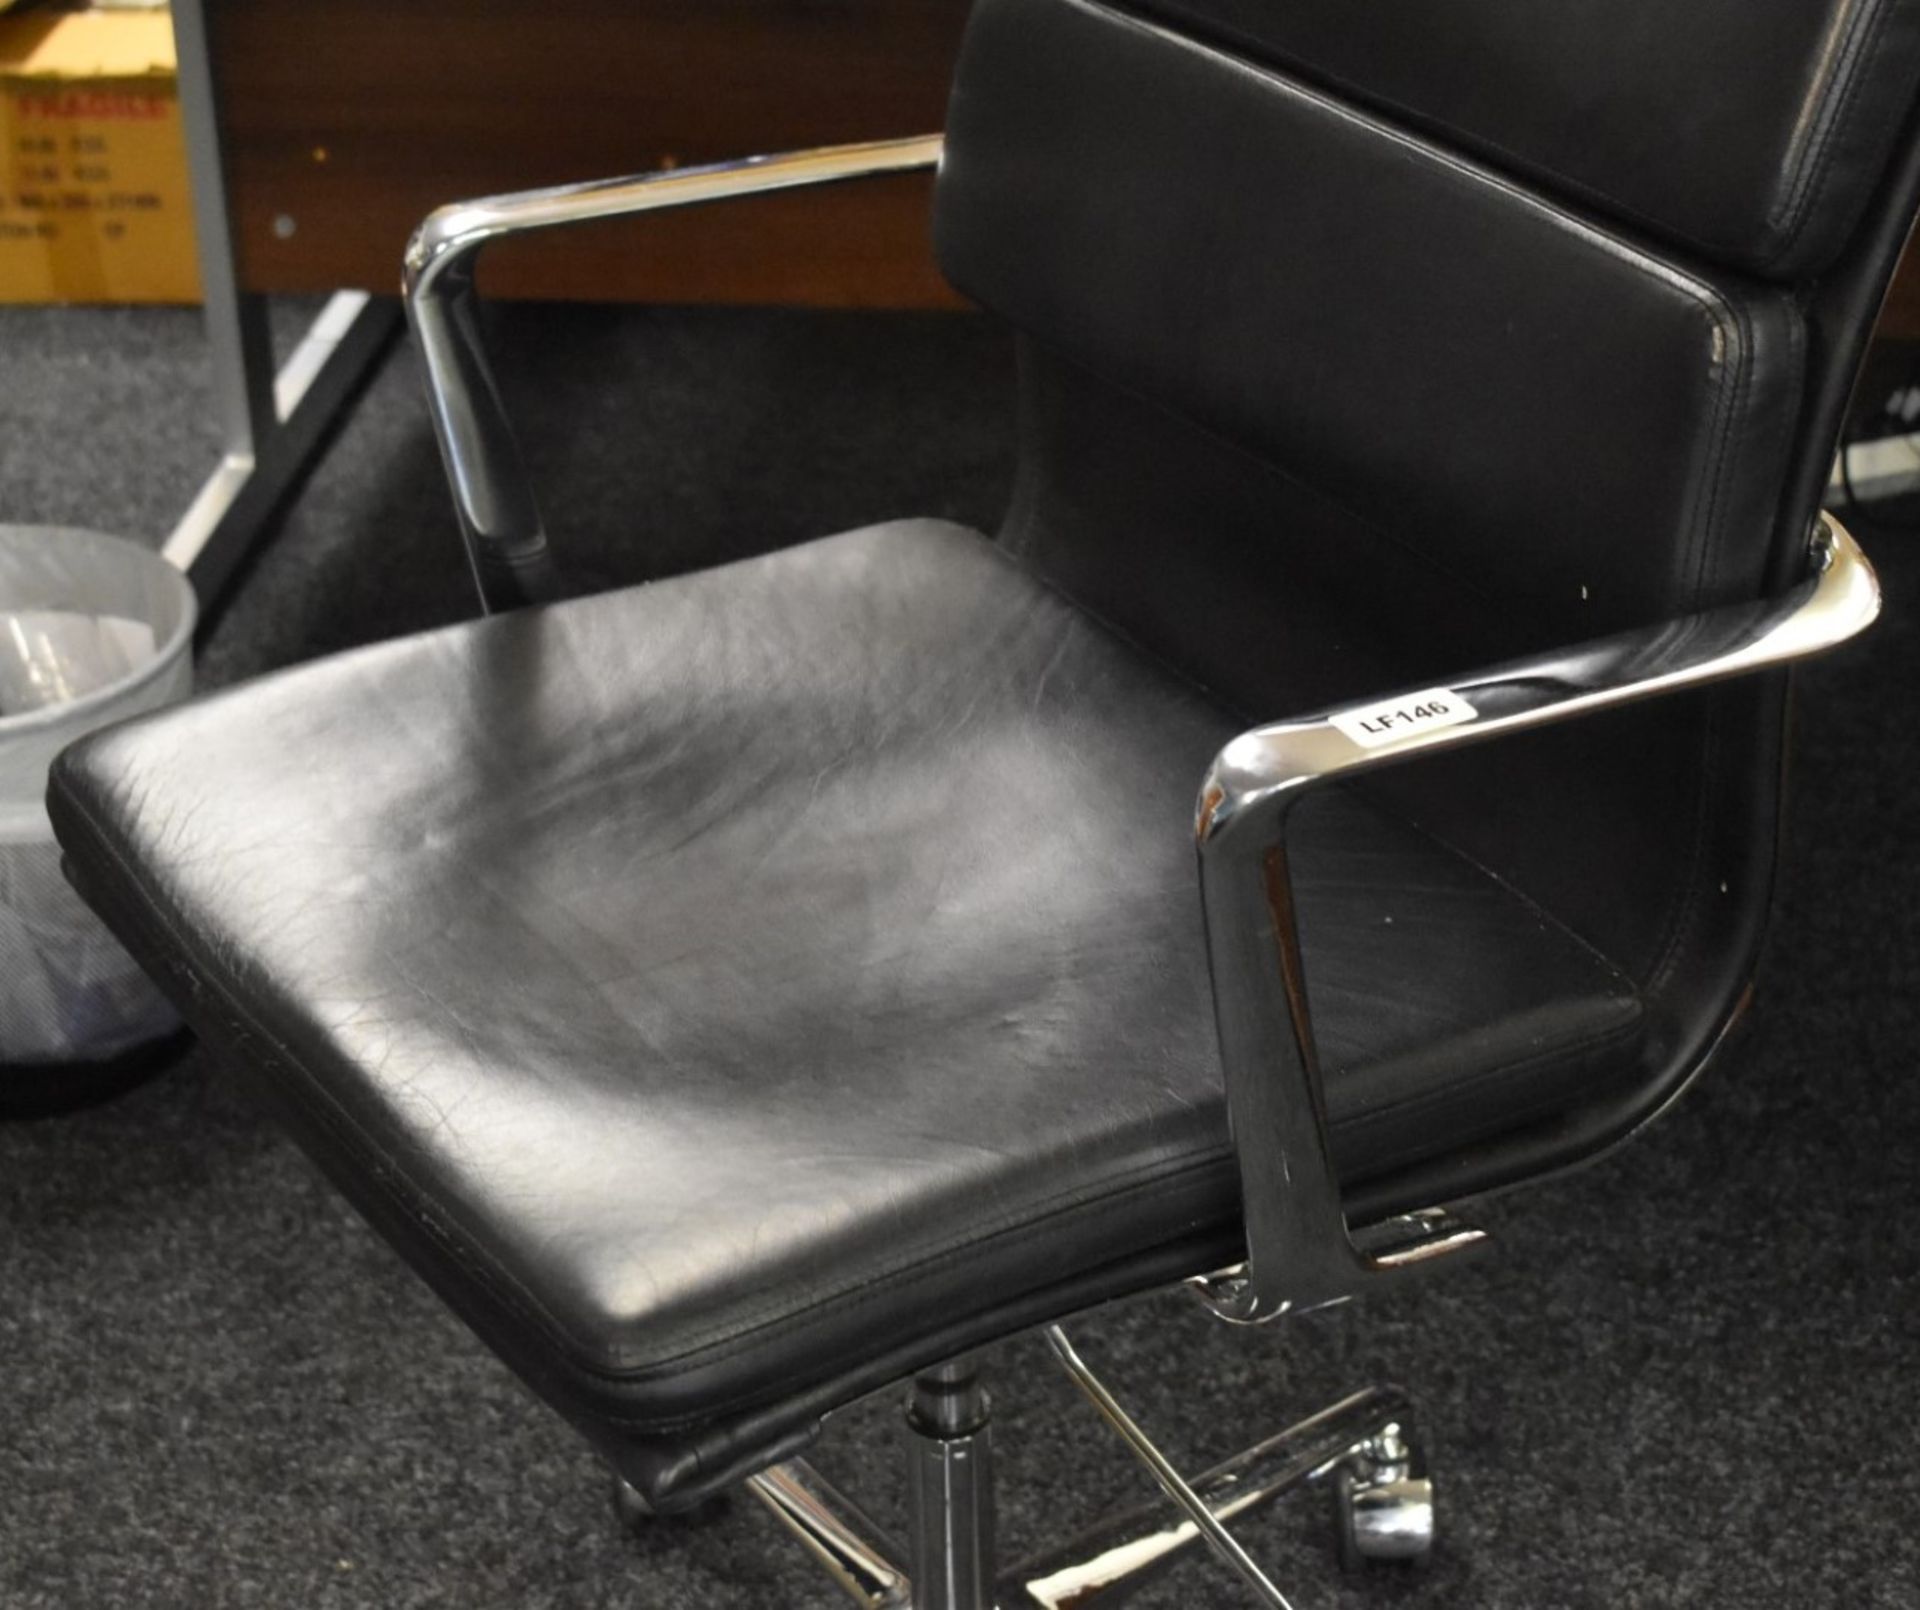 1 x Eames Inspired Office Chair - Swivel Office Chair Upholstered in Black Leather - Image 5 of 7